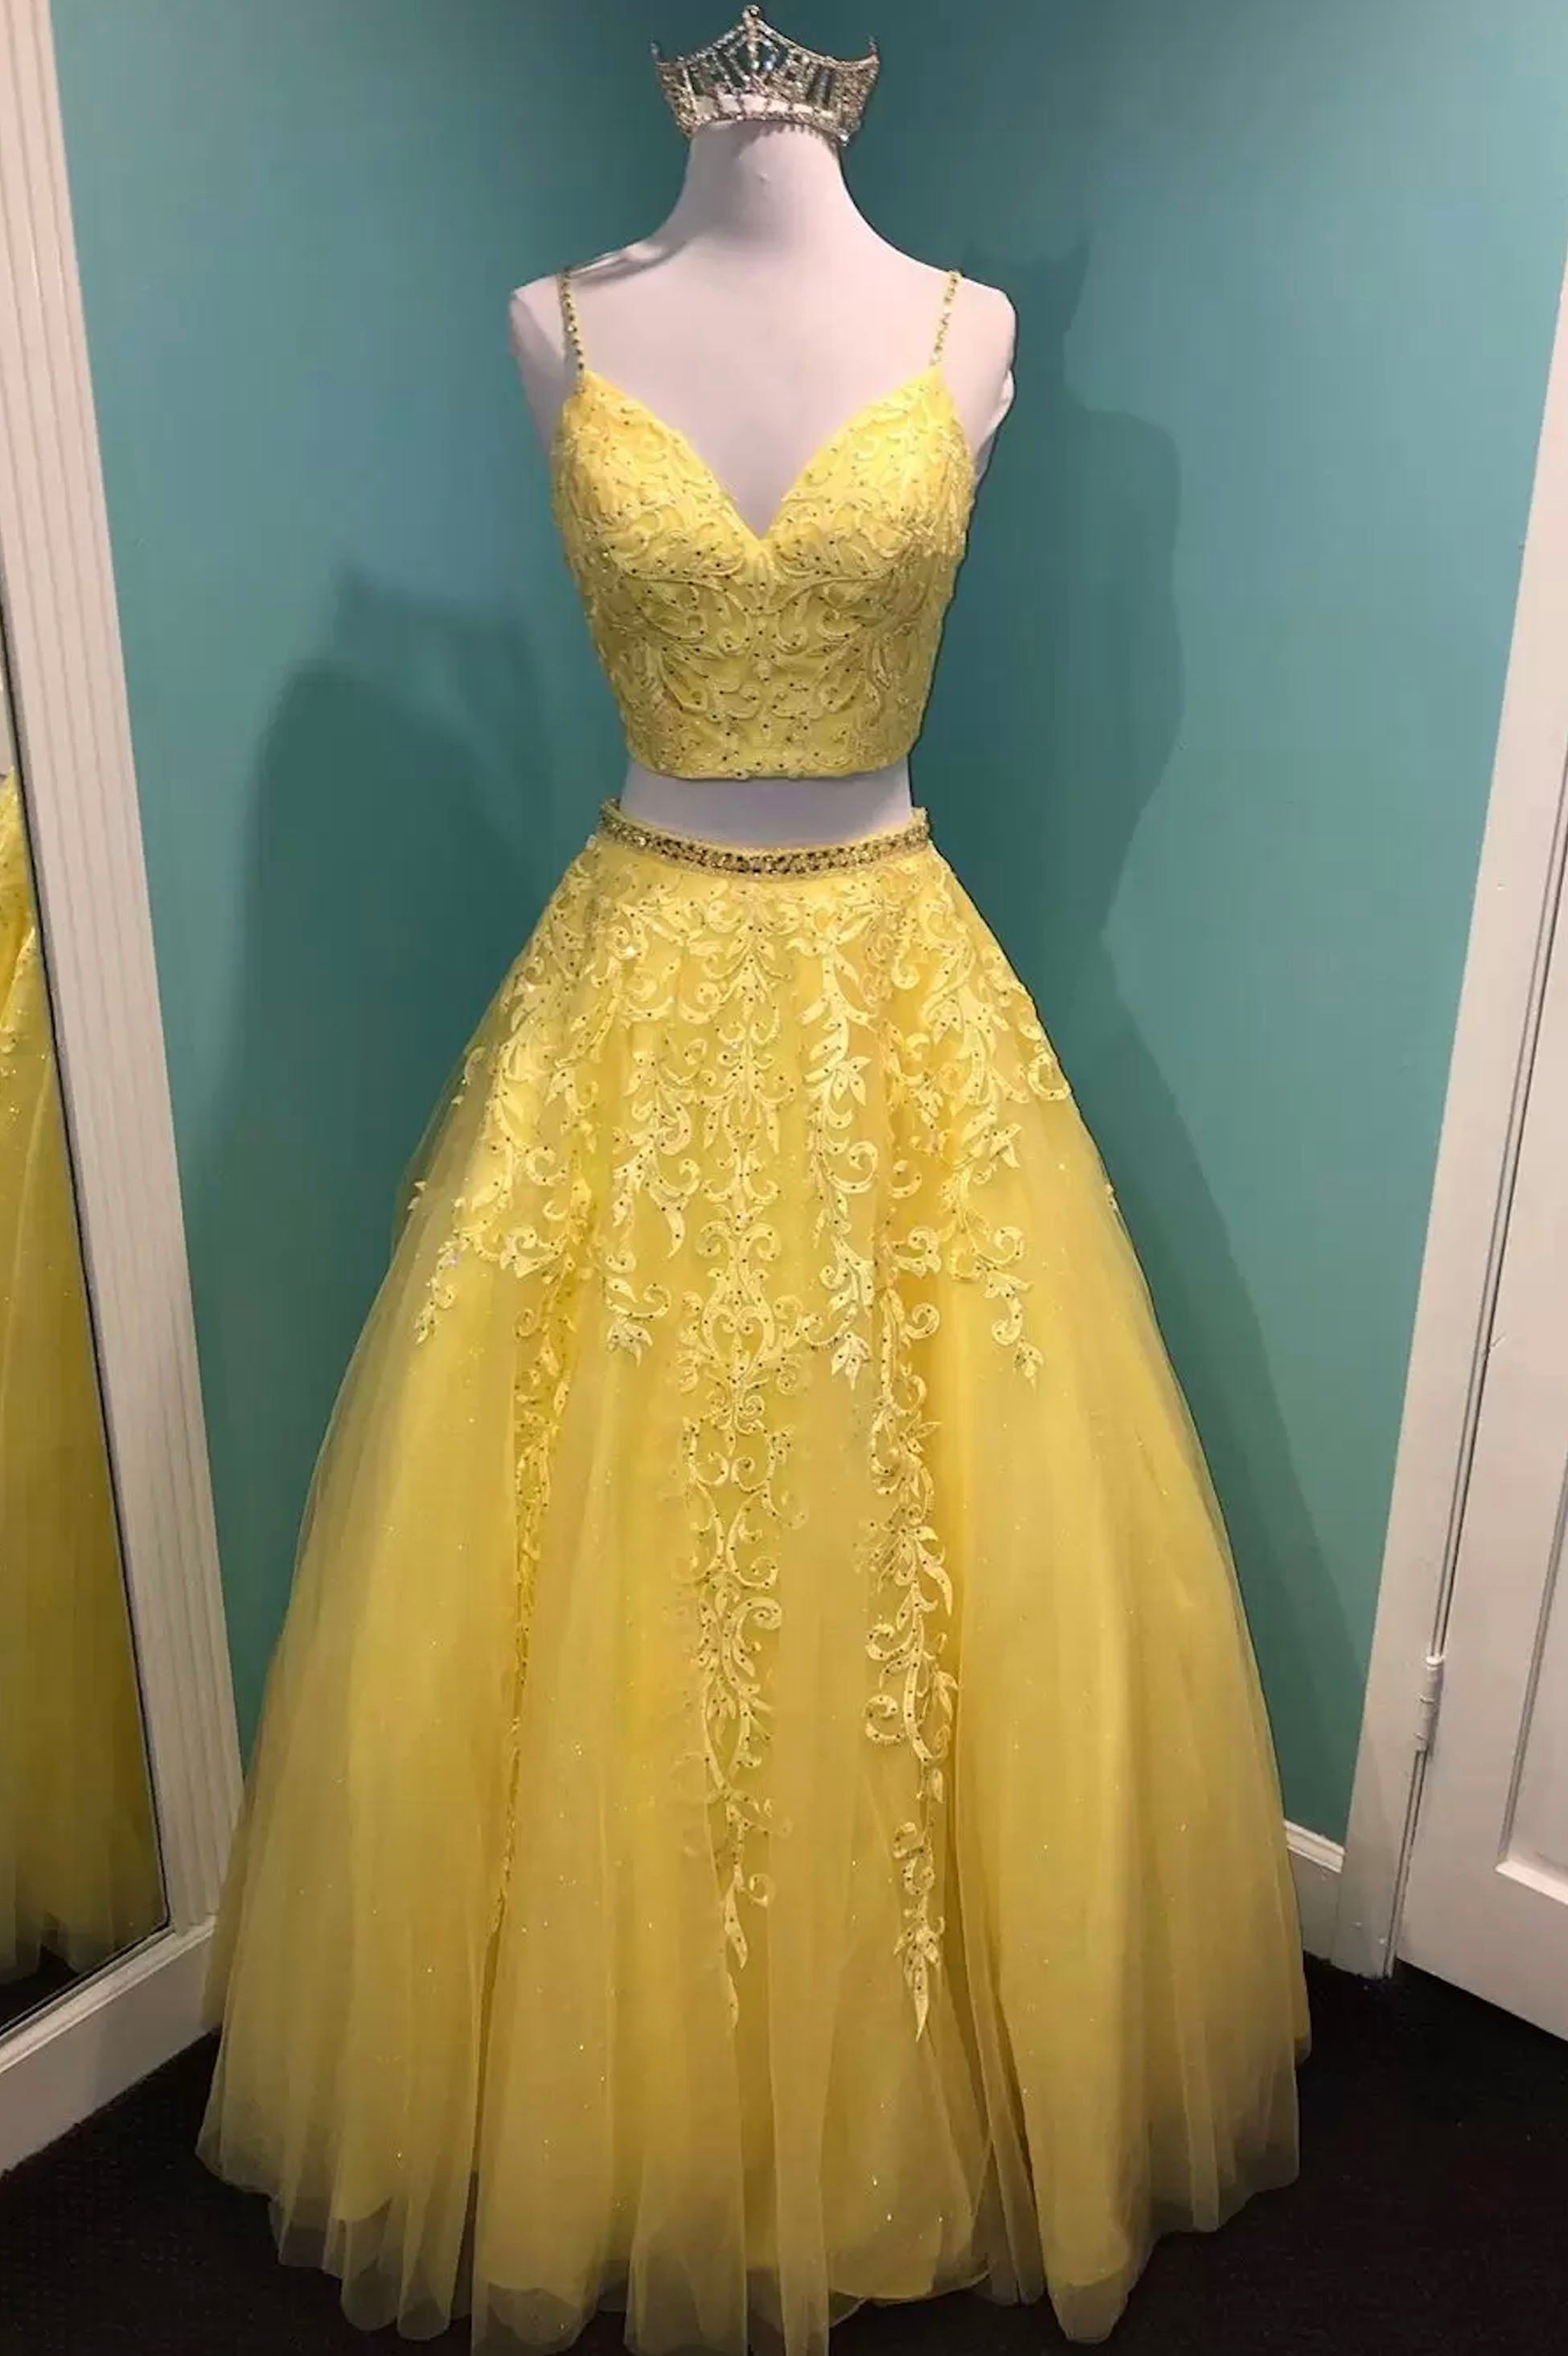 Yellow V-Neck Lace Long Prom Dress Outfits For Girls, Two Pieces Evening Graduation Dress